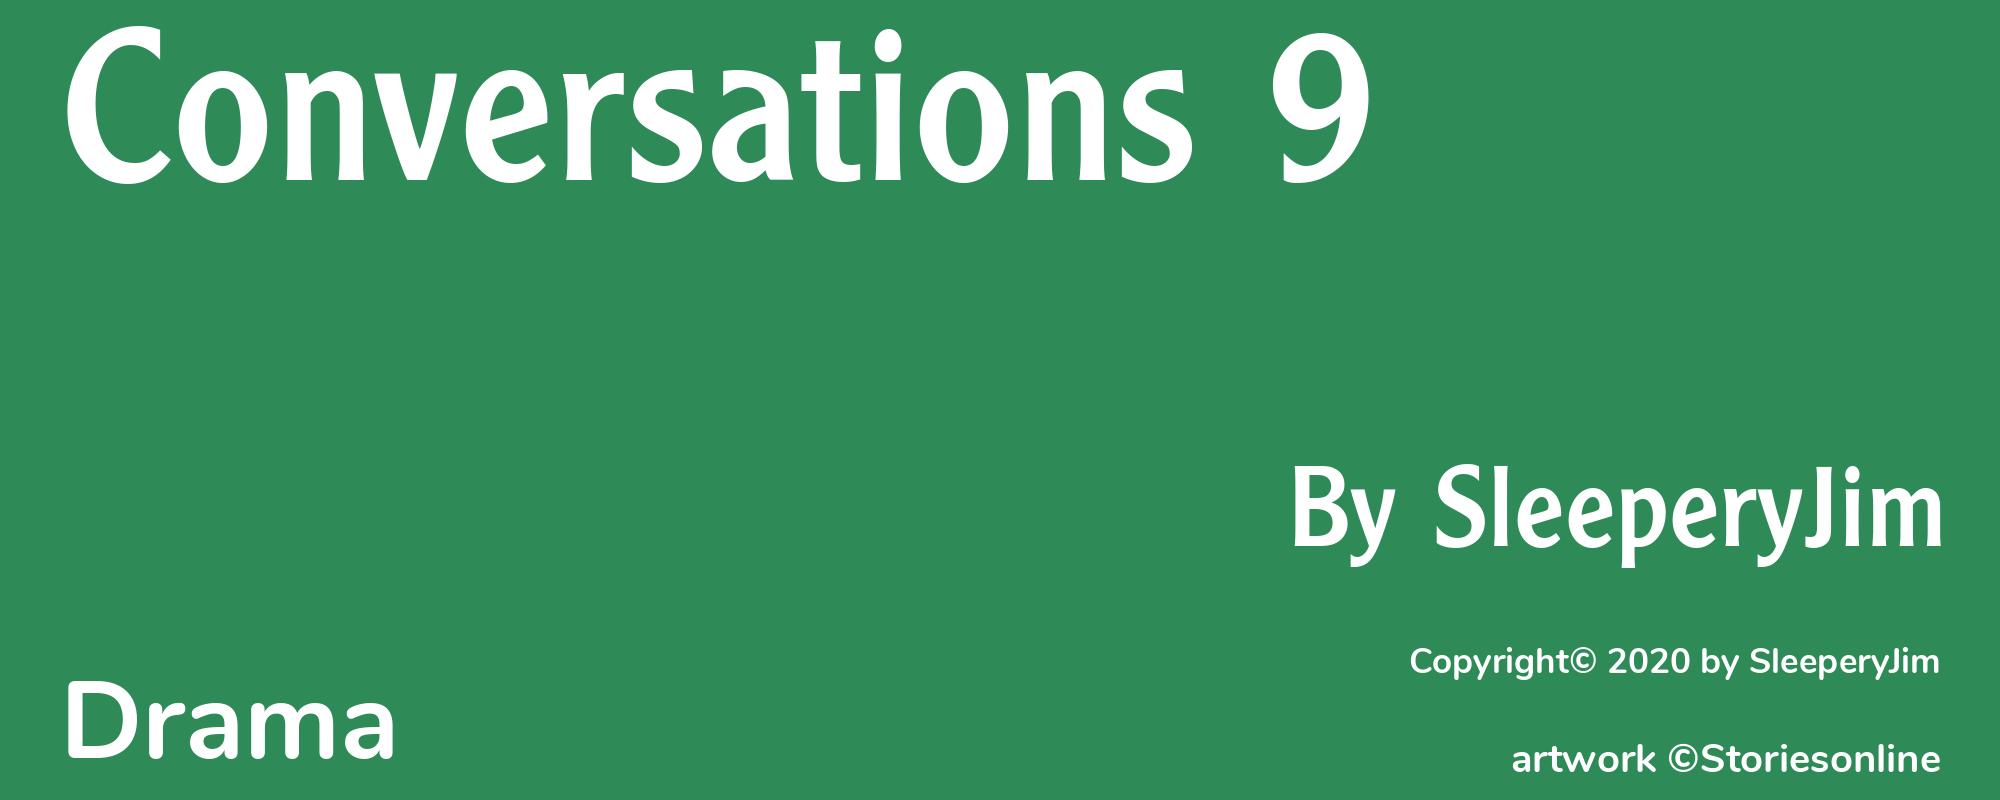 Conversations 9 - Cover